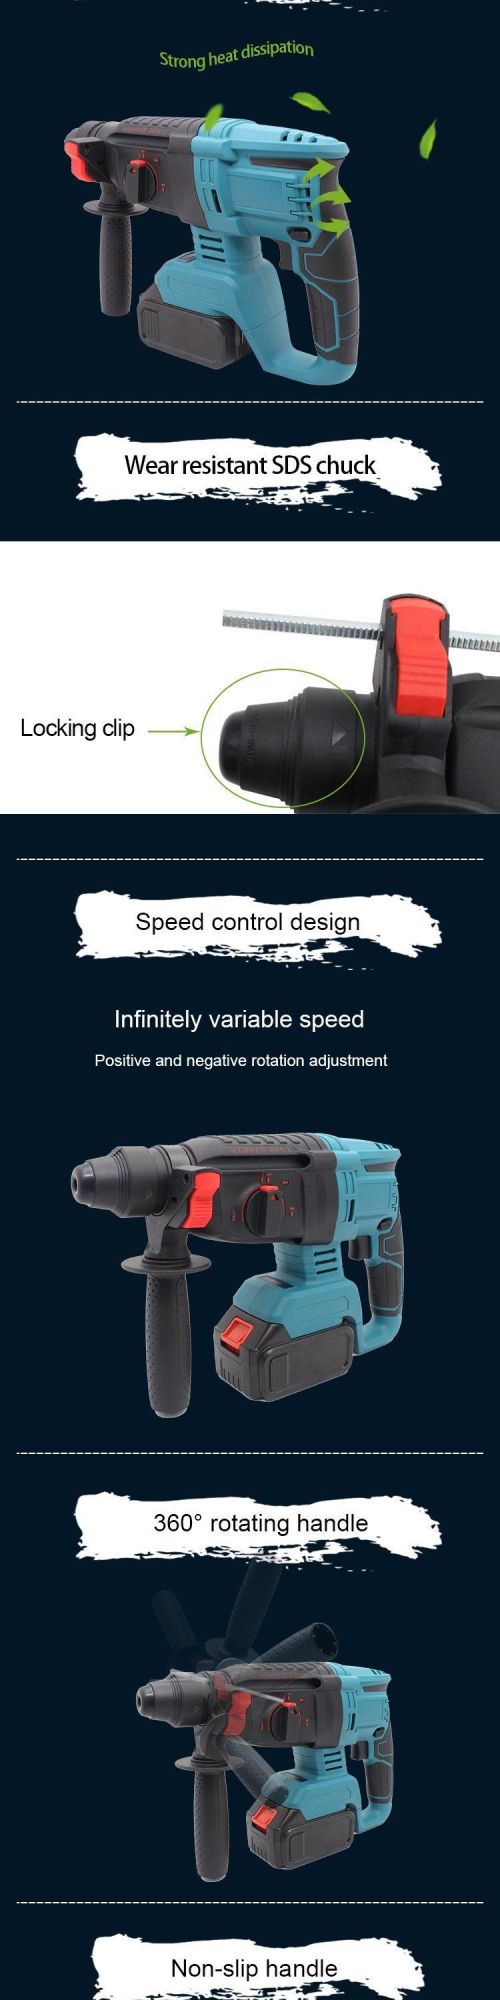 Jsperfect Cordless Brushless Rotary Hammer Drill Driver with Lithium Battery